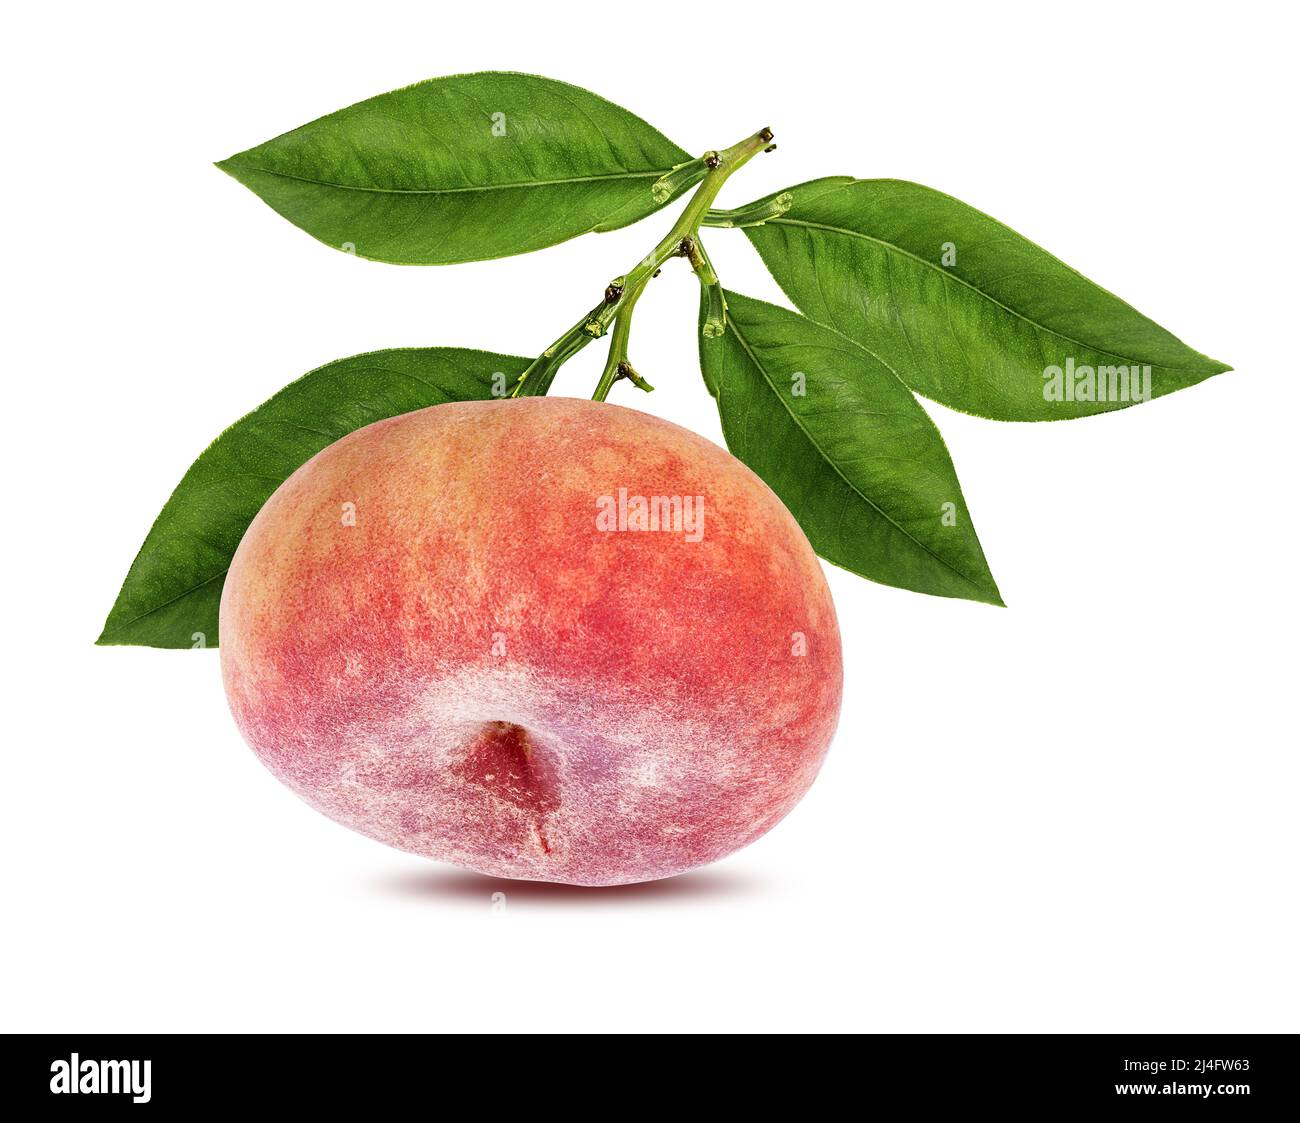 Peach isolate. Peach with leaf on white background. Full depth of field. Stock Photo